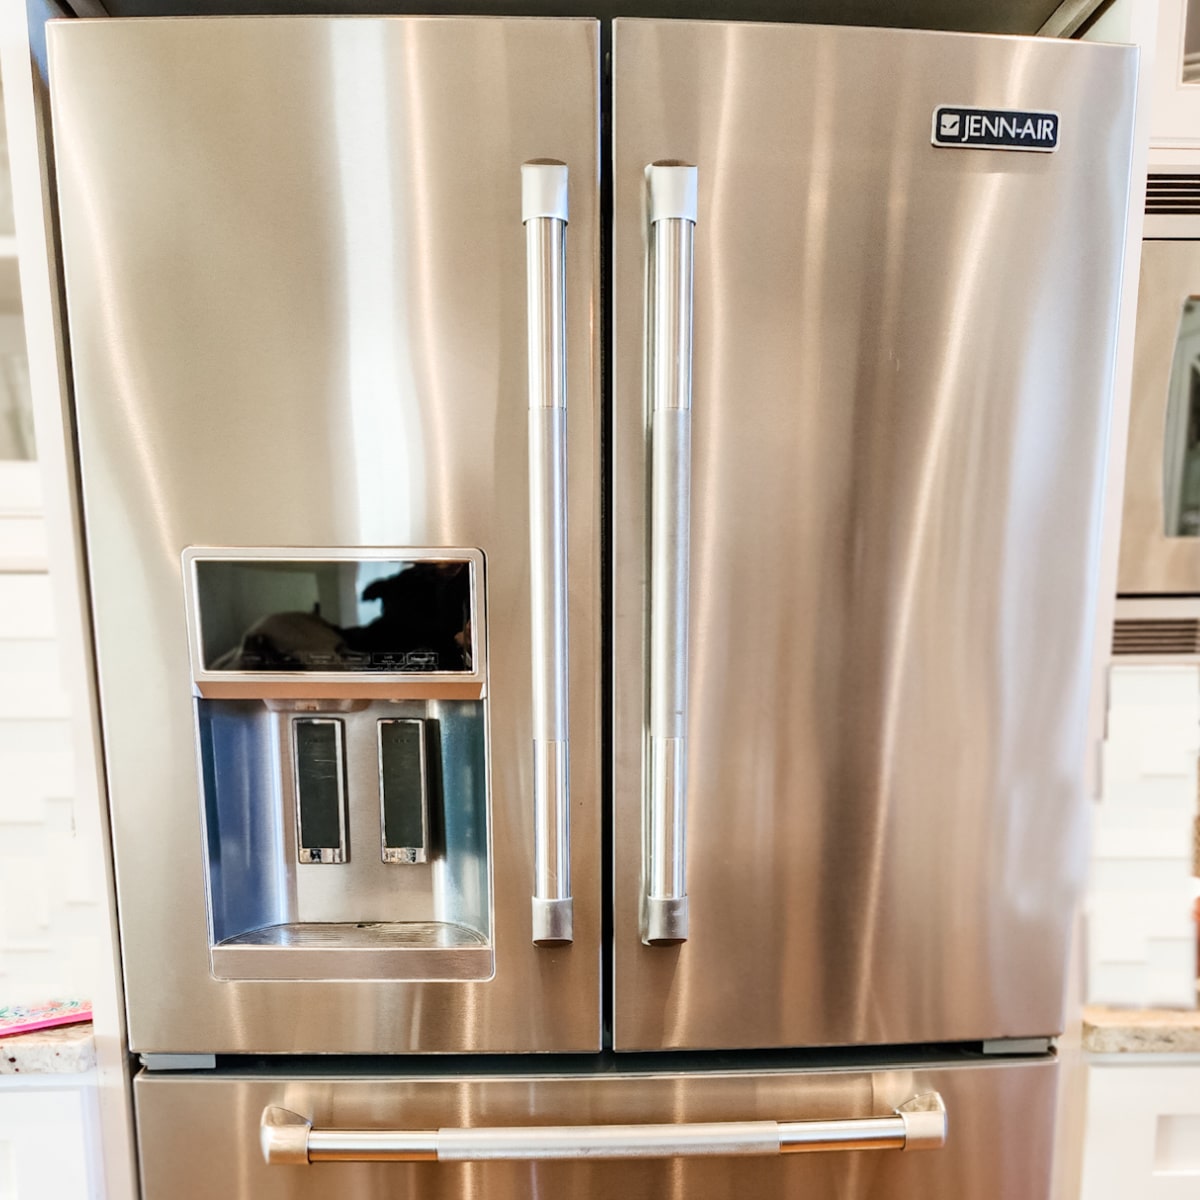 How to Clean Stainless Steel Appliances - DIY Stainless Steel